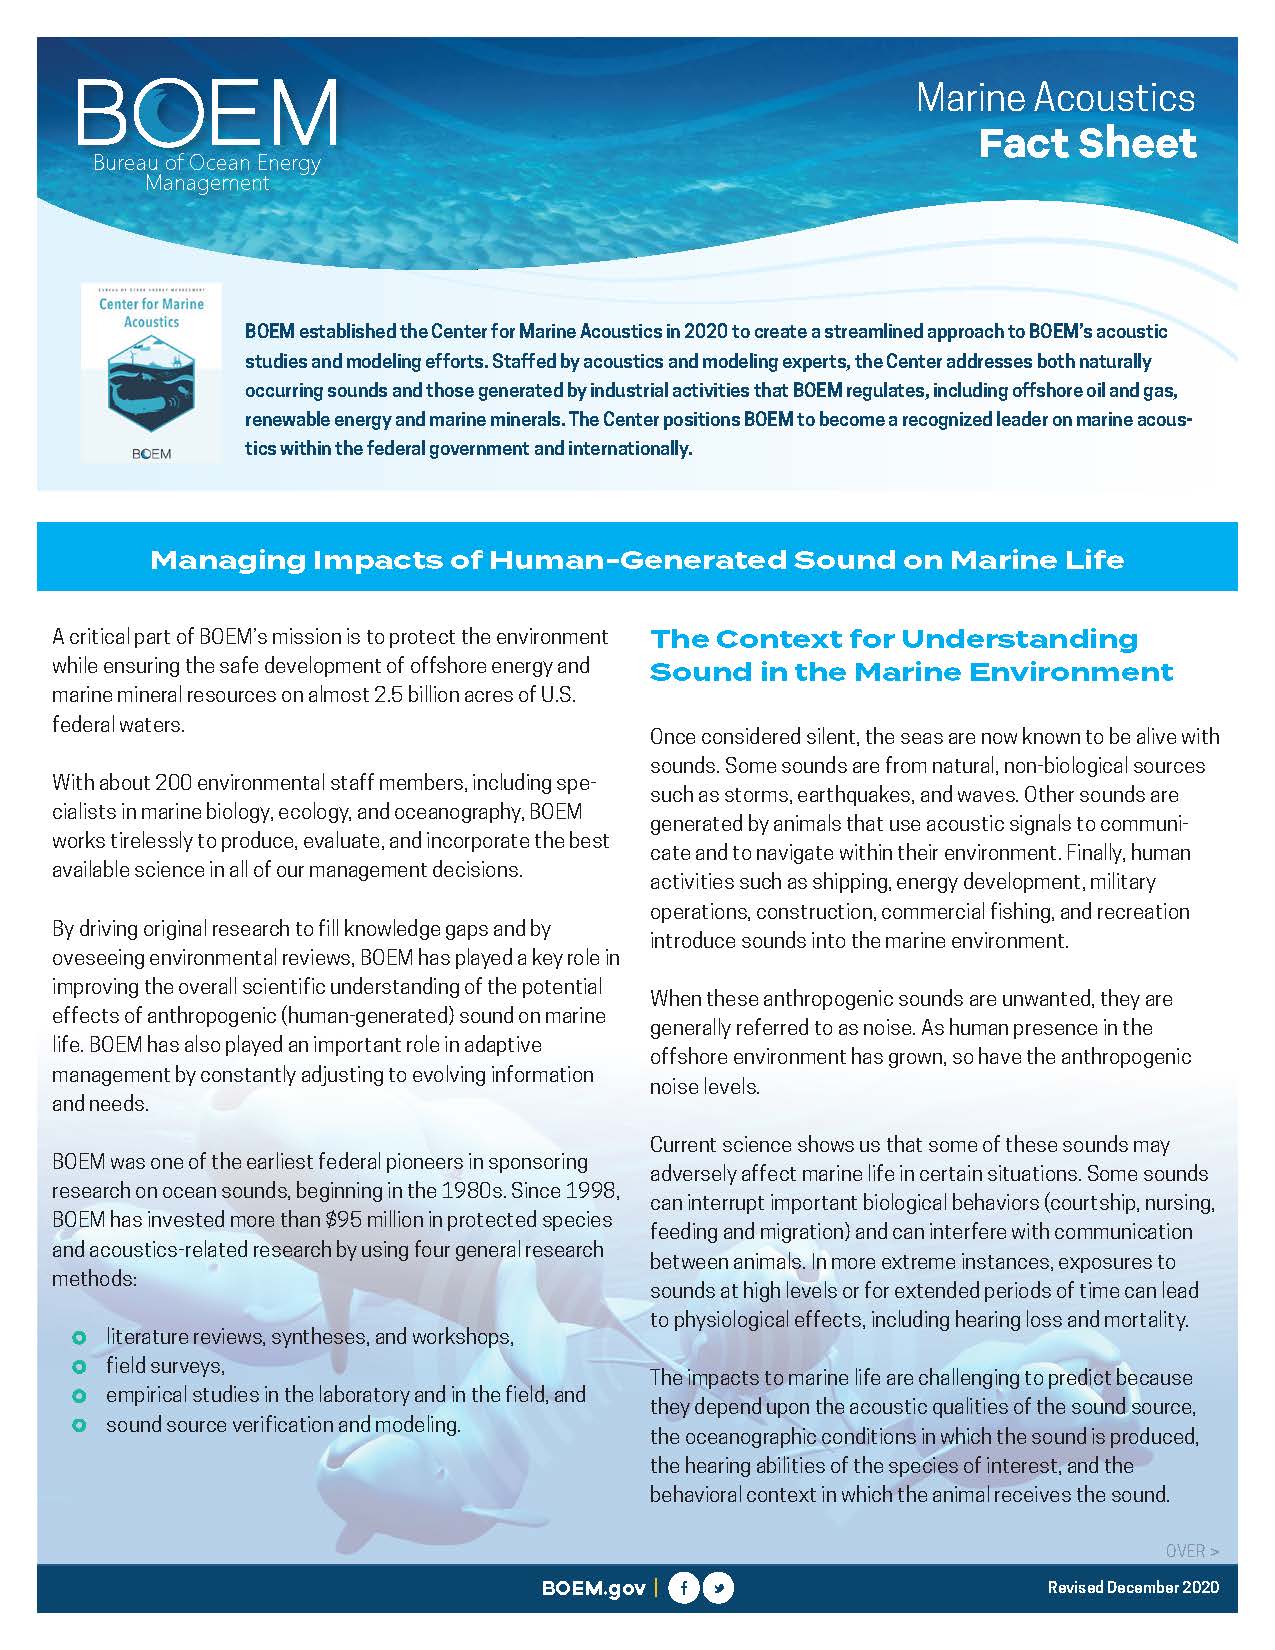 Managing Impacts of Human-generated Noise on Marine Life Fact Sheet